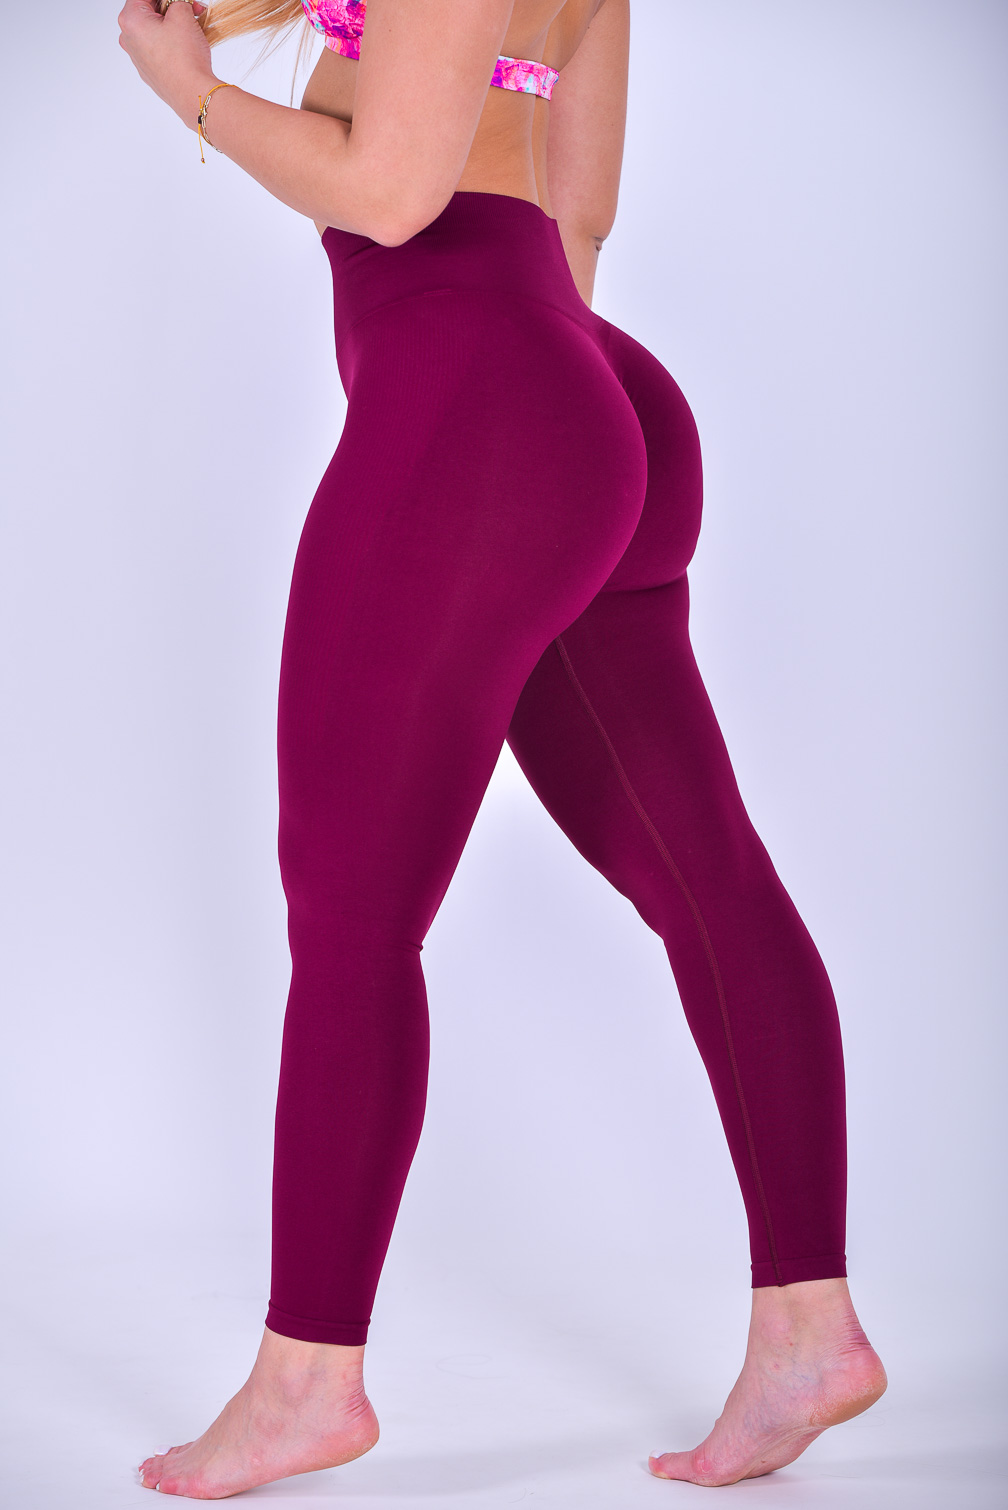 Classic Scrunch Tights Maroon  Training clothes, Womens tights, Scrunch